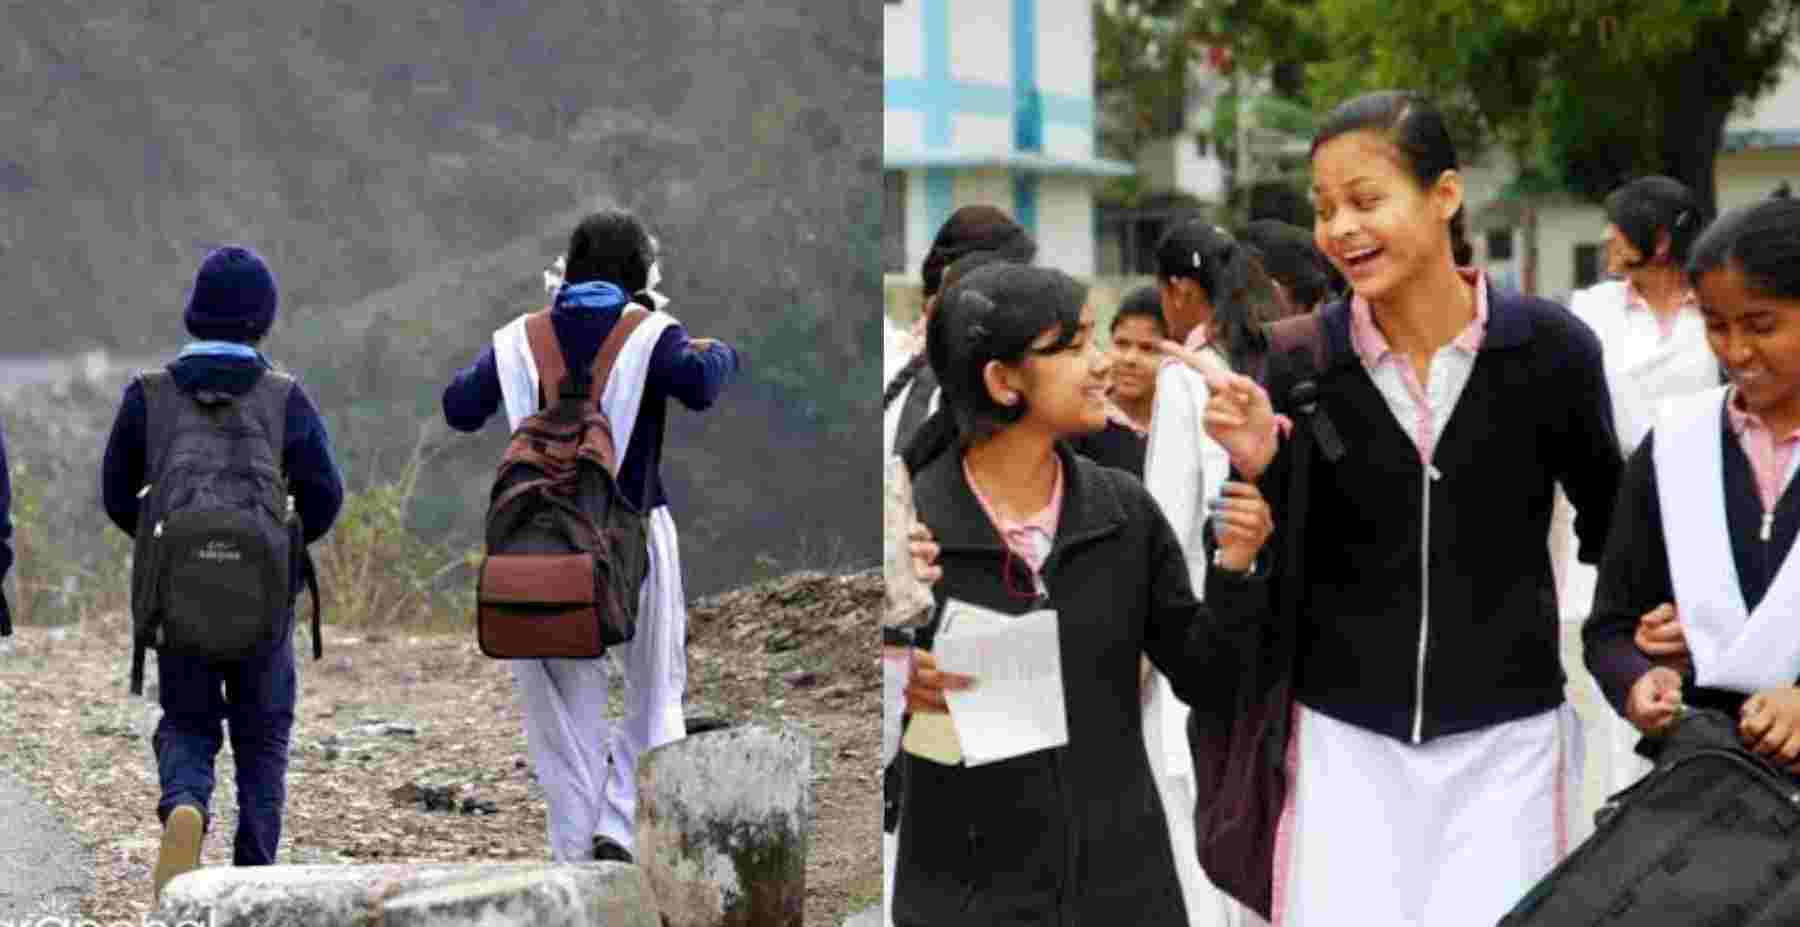 Uttarakhand: Uttarakhand became the first state in the country to implement the New Education Policy-2020